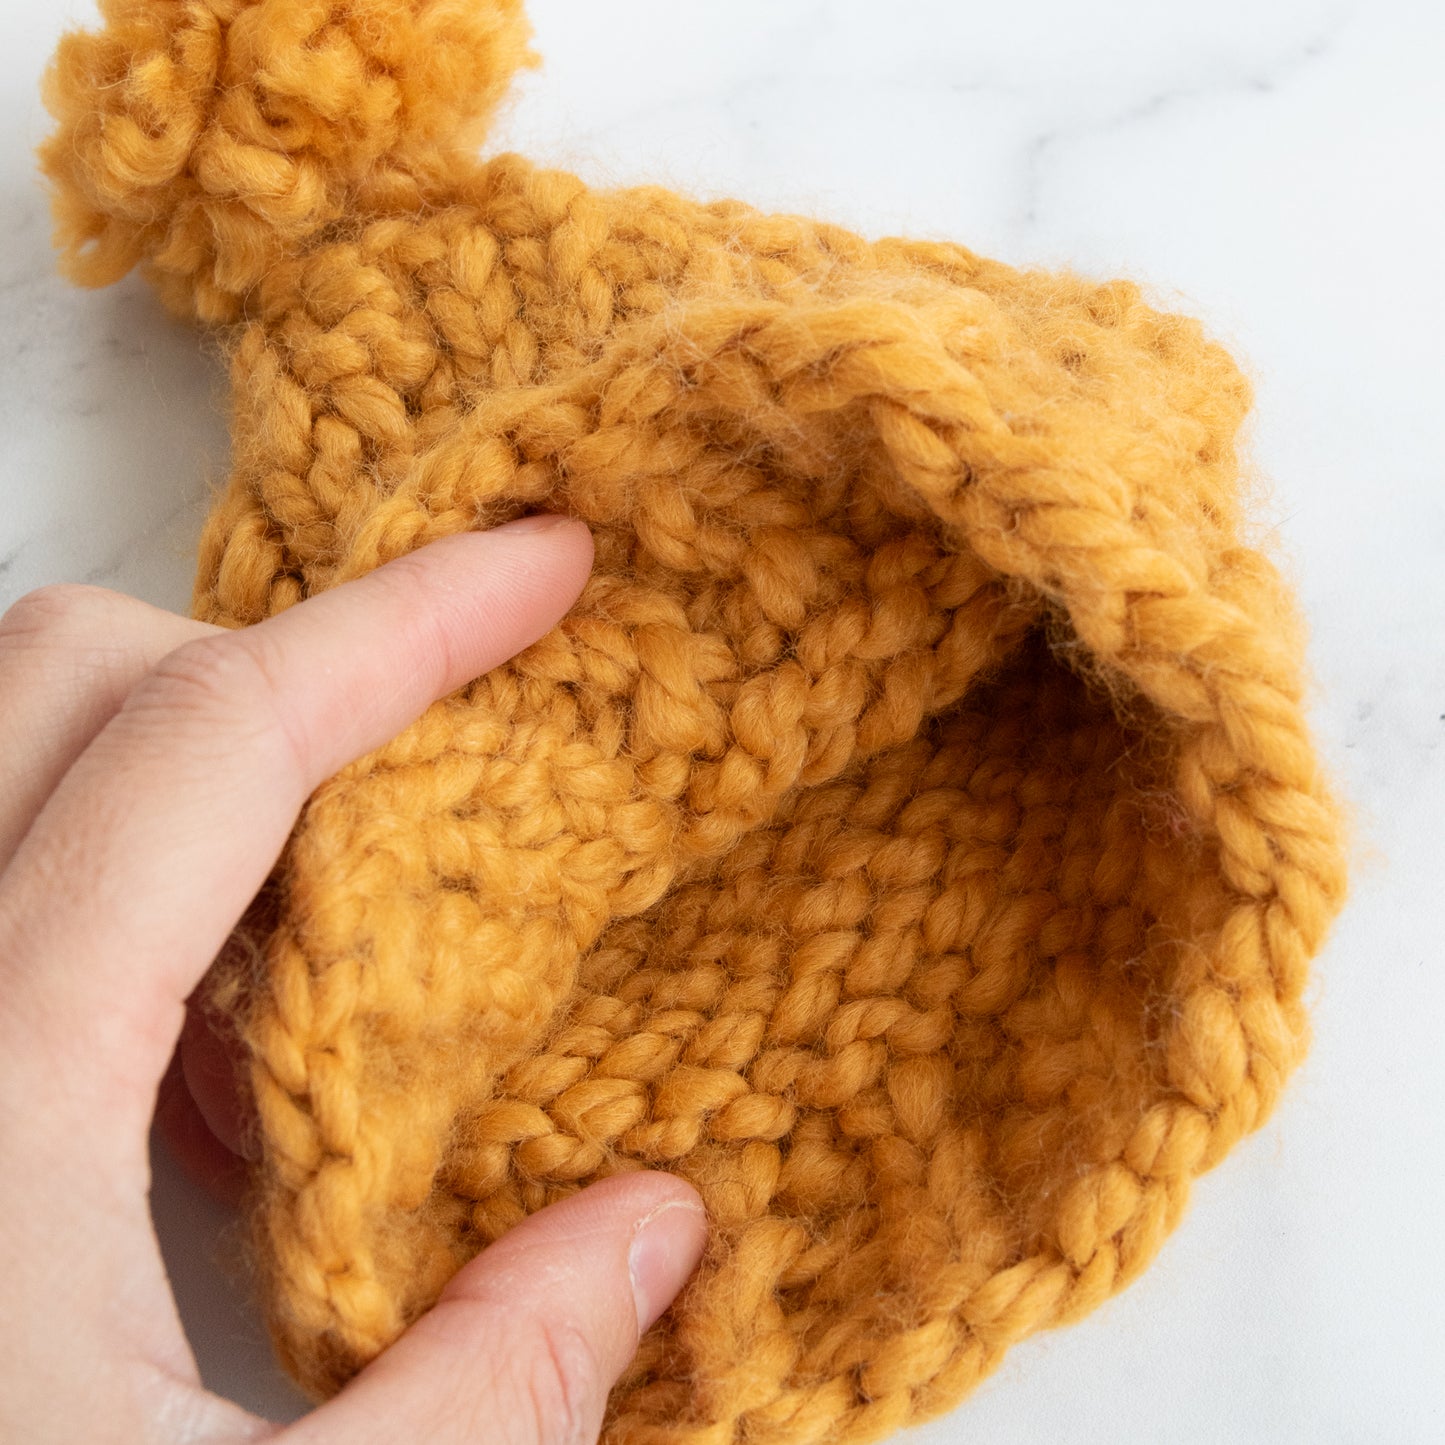 Hand Knitted Mustard Hat (0-3M)